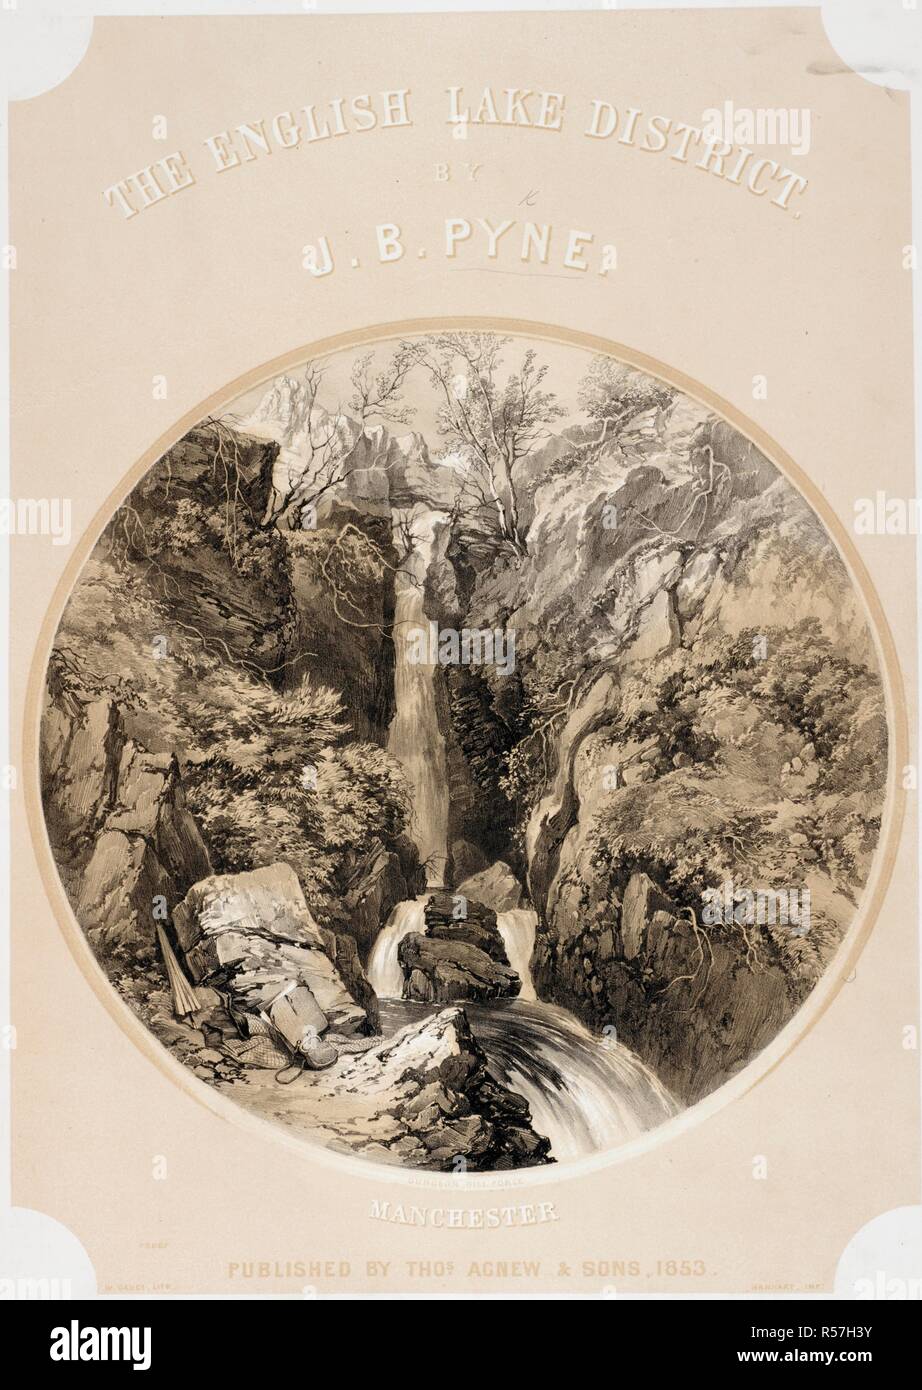 A waterfall. The English Lake district (painted) by J B Payne (Lithographed by W Gauci) [With letter-press descriptions]. Manchester, 1853. Source: Cup.652.c.5, title page. Language: English. Stock Photo